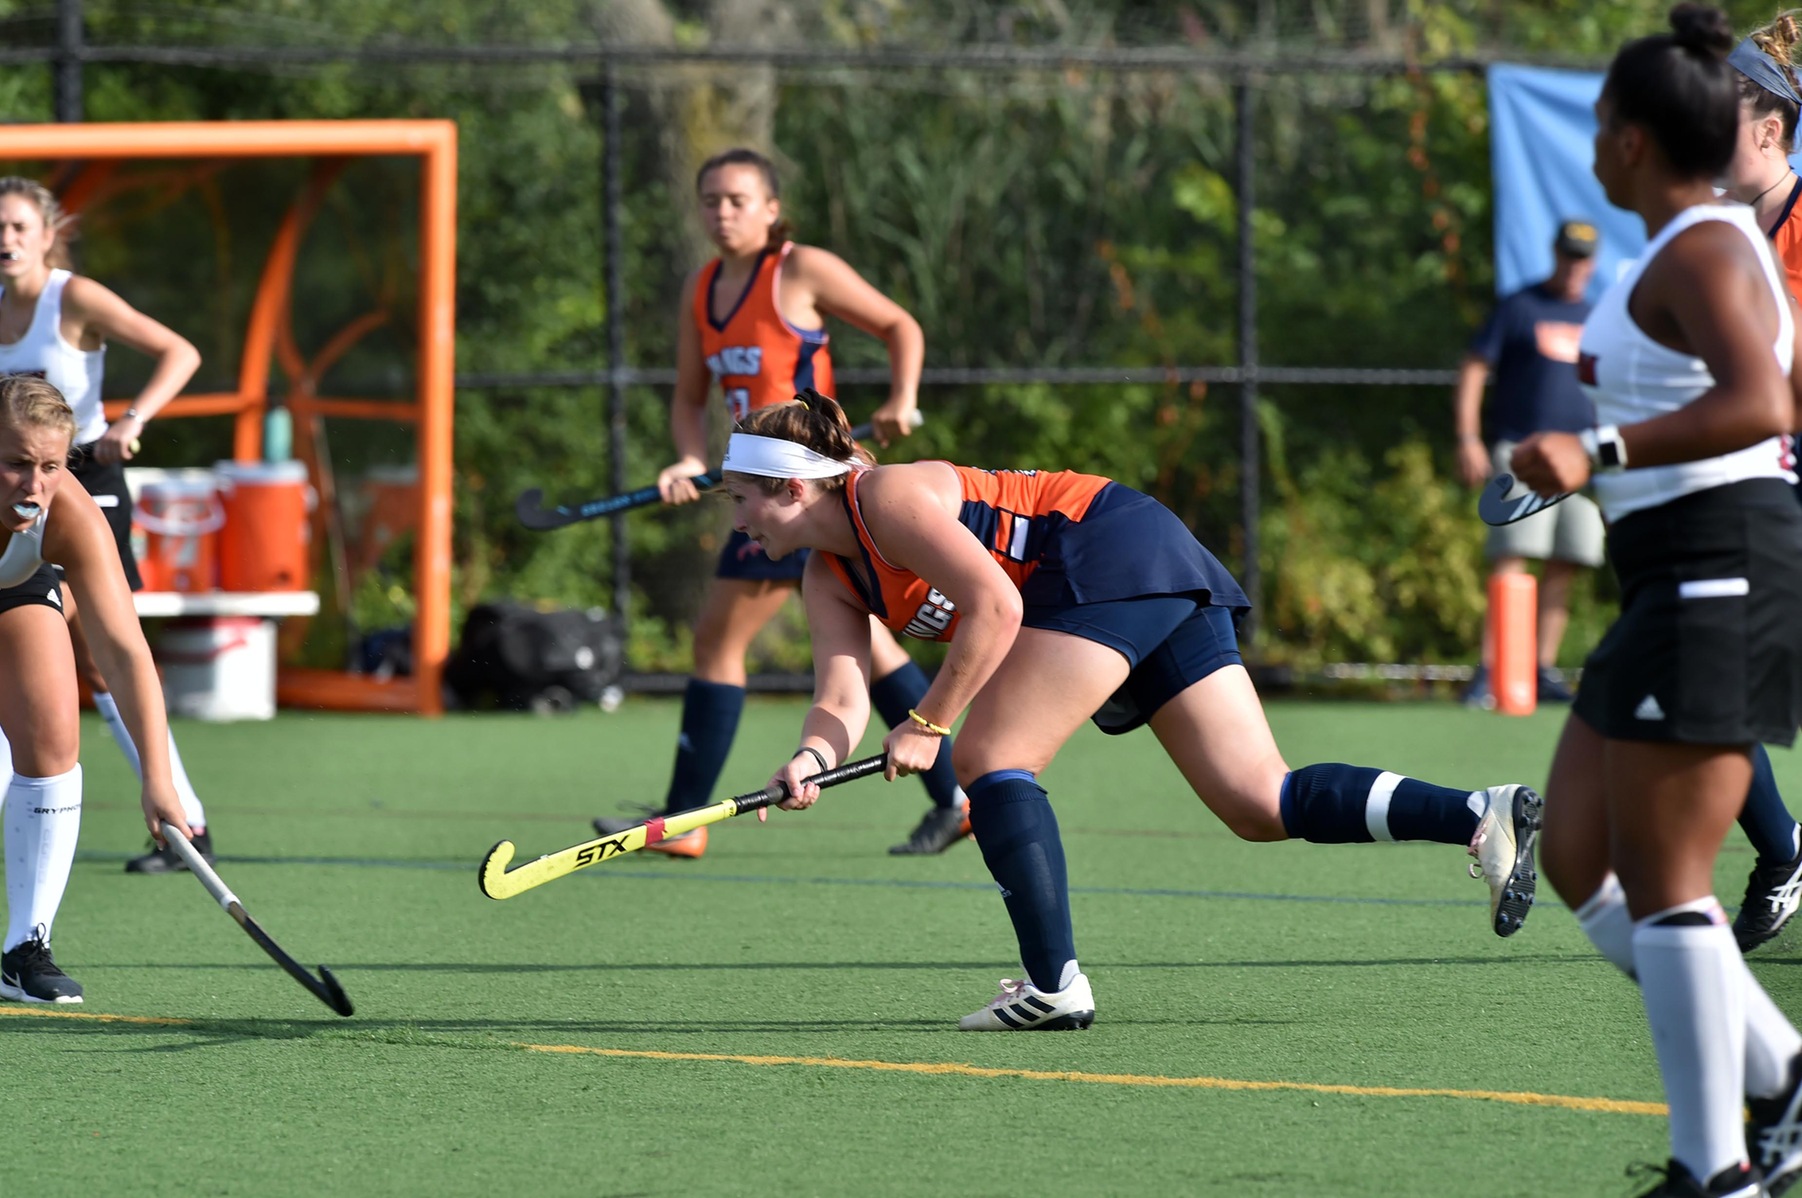 Salem State Falls, 5-1, to Western Connecticut